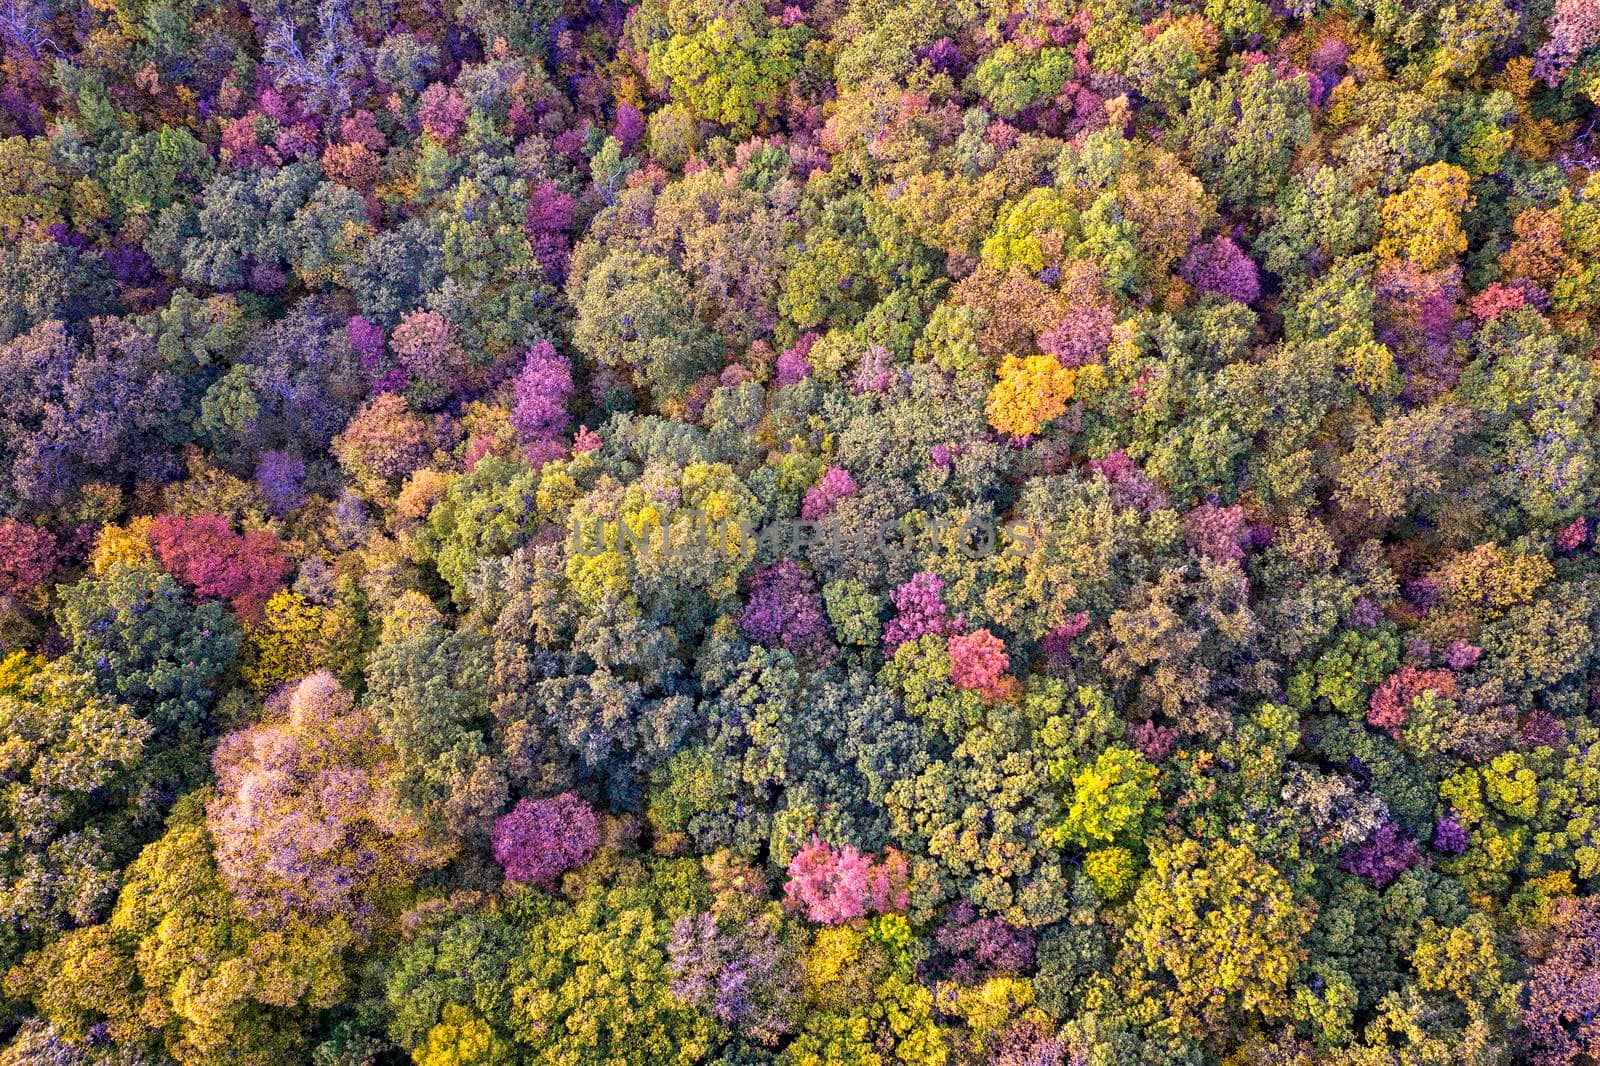 Autumn colorful forest. Aerial view from a drone over colorful autumn leaves in the forest.